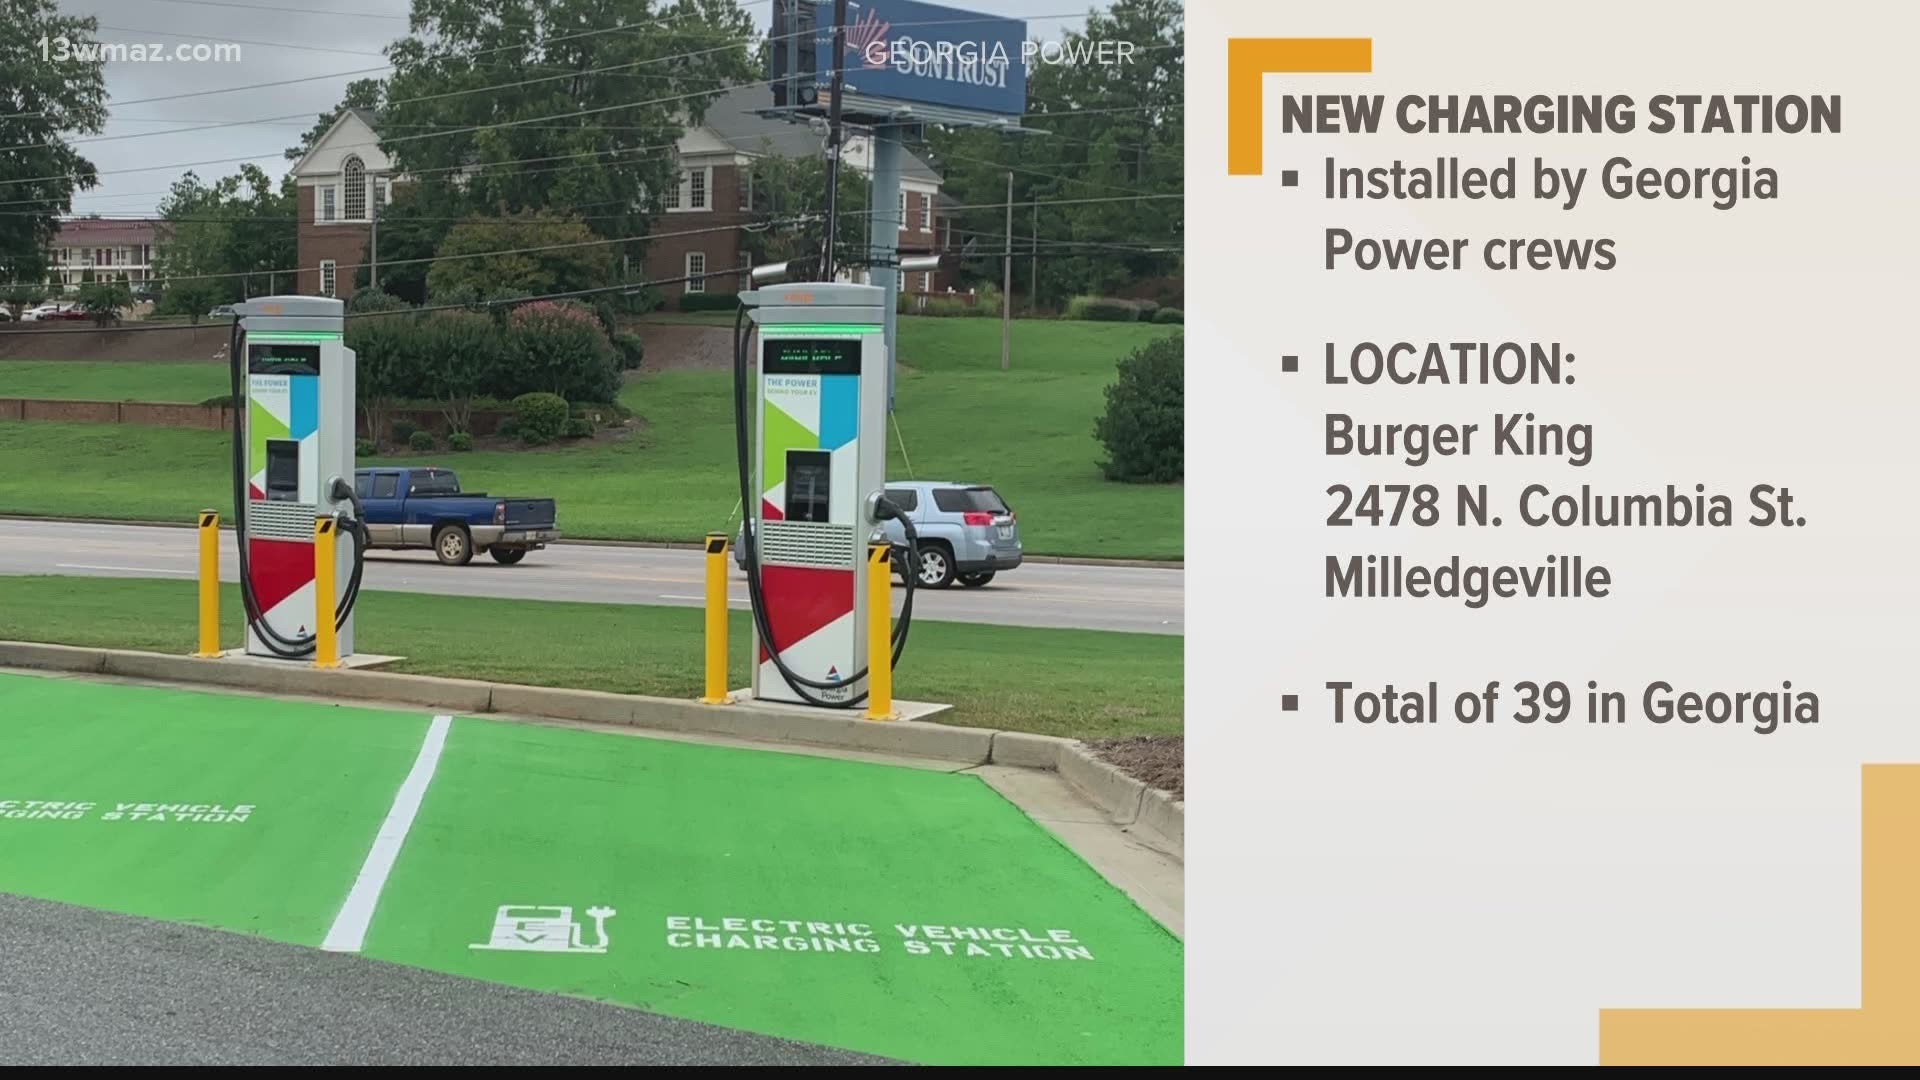 georgia-power-expands-electric-vehicle-charging-to-milledgeville